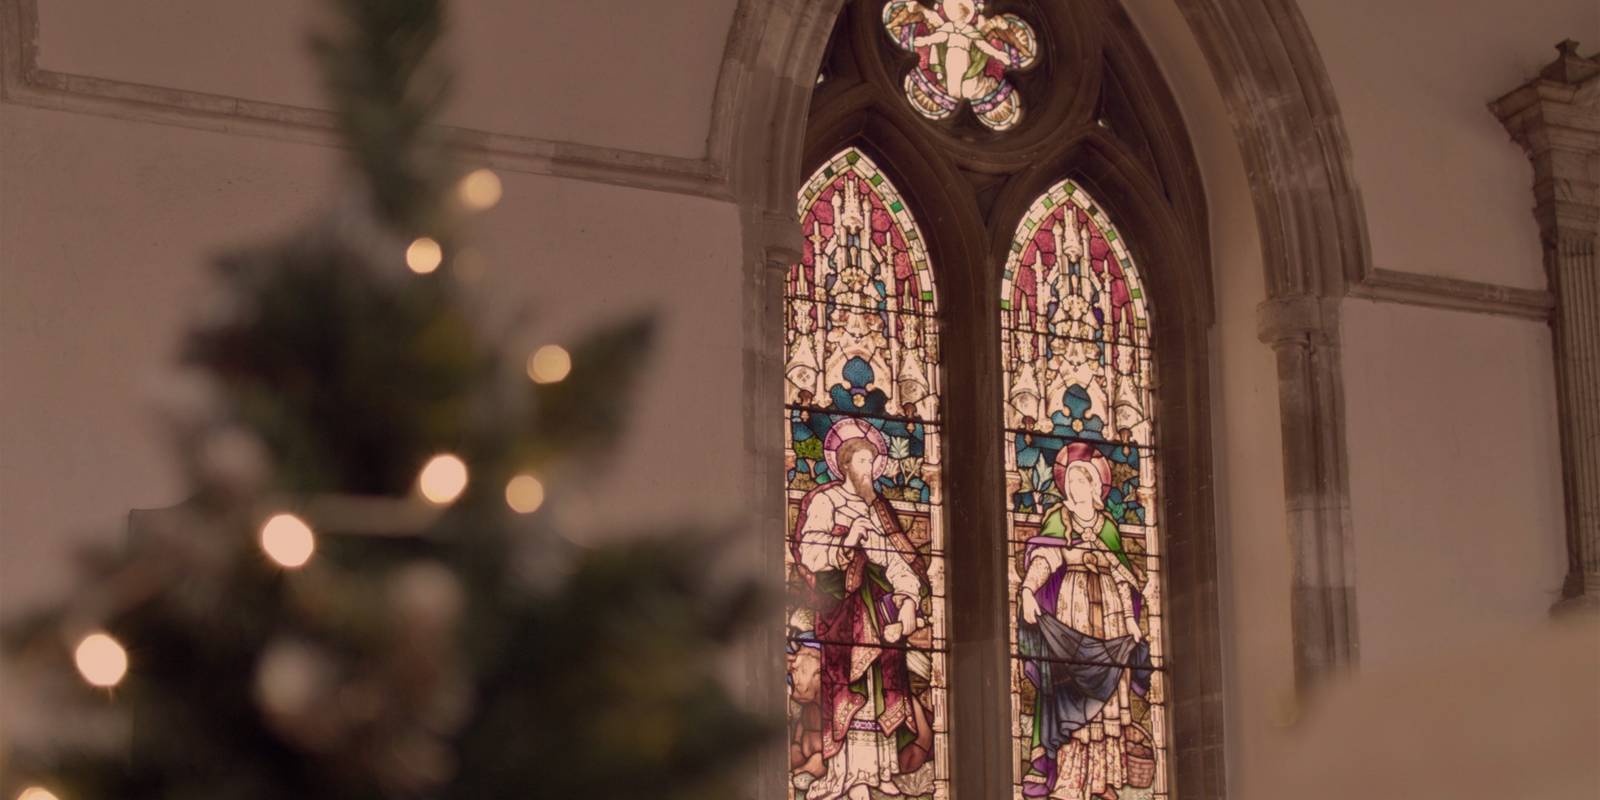 Stained Glass window with a Christmas tree in the foreground